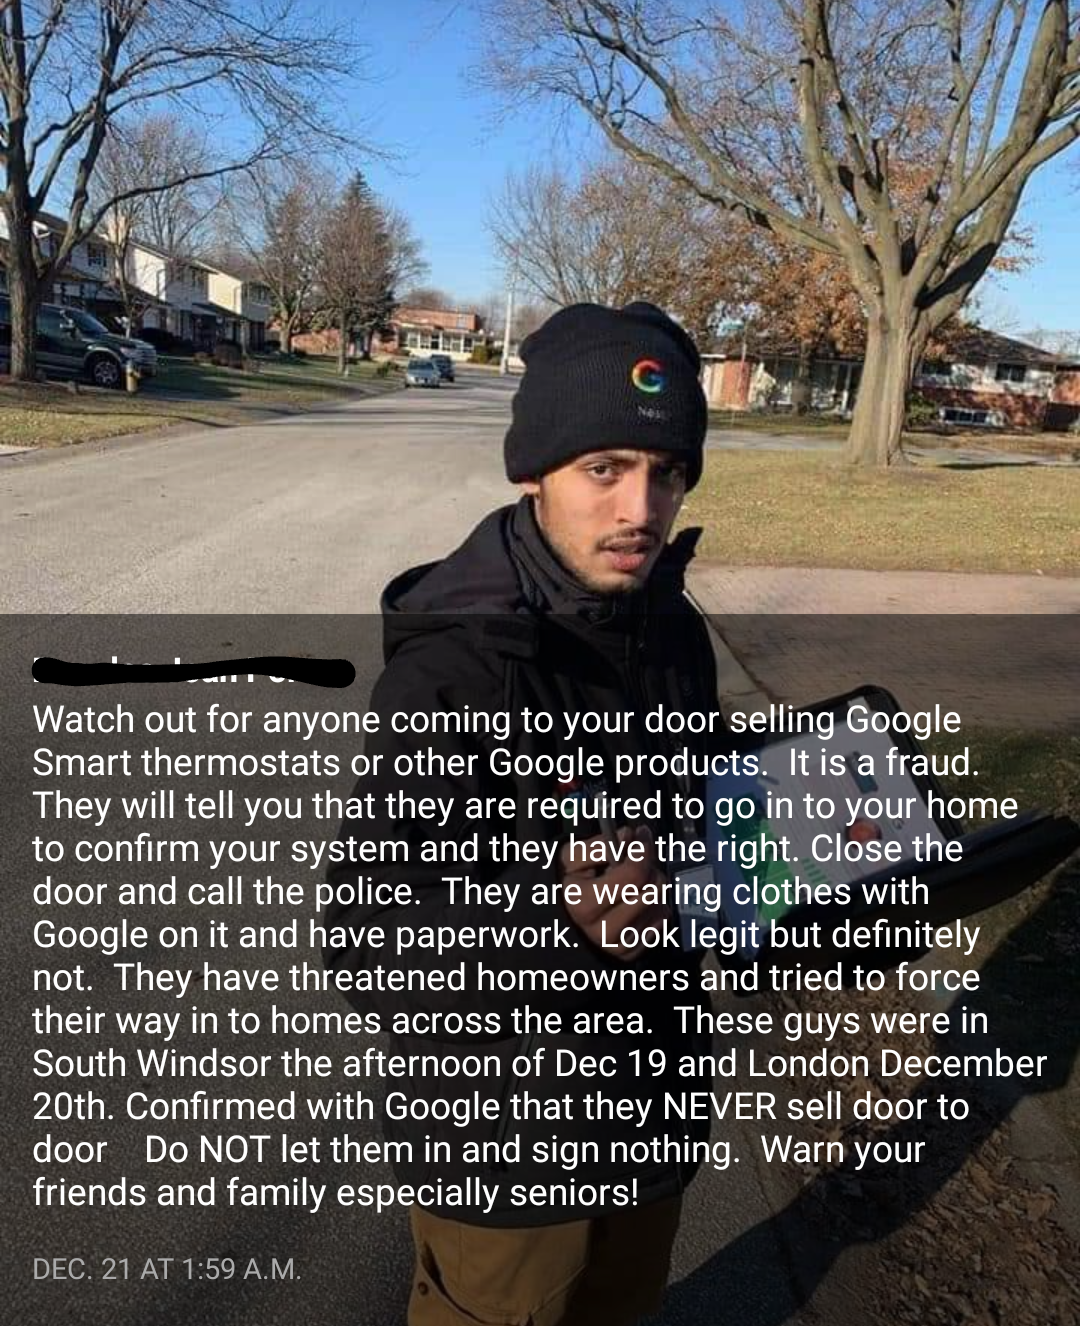 photo caption - Watch out for anyone coming to your door selling Google Smart thermostats or other Google products. It is a fraud. They will tell you that they are required to go in to your home to confirm your system and they have the right. Close the do